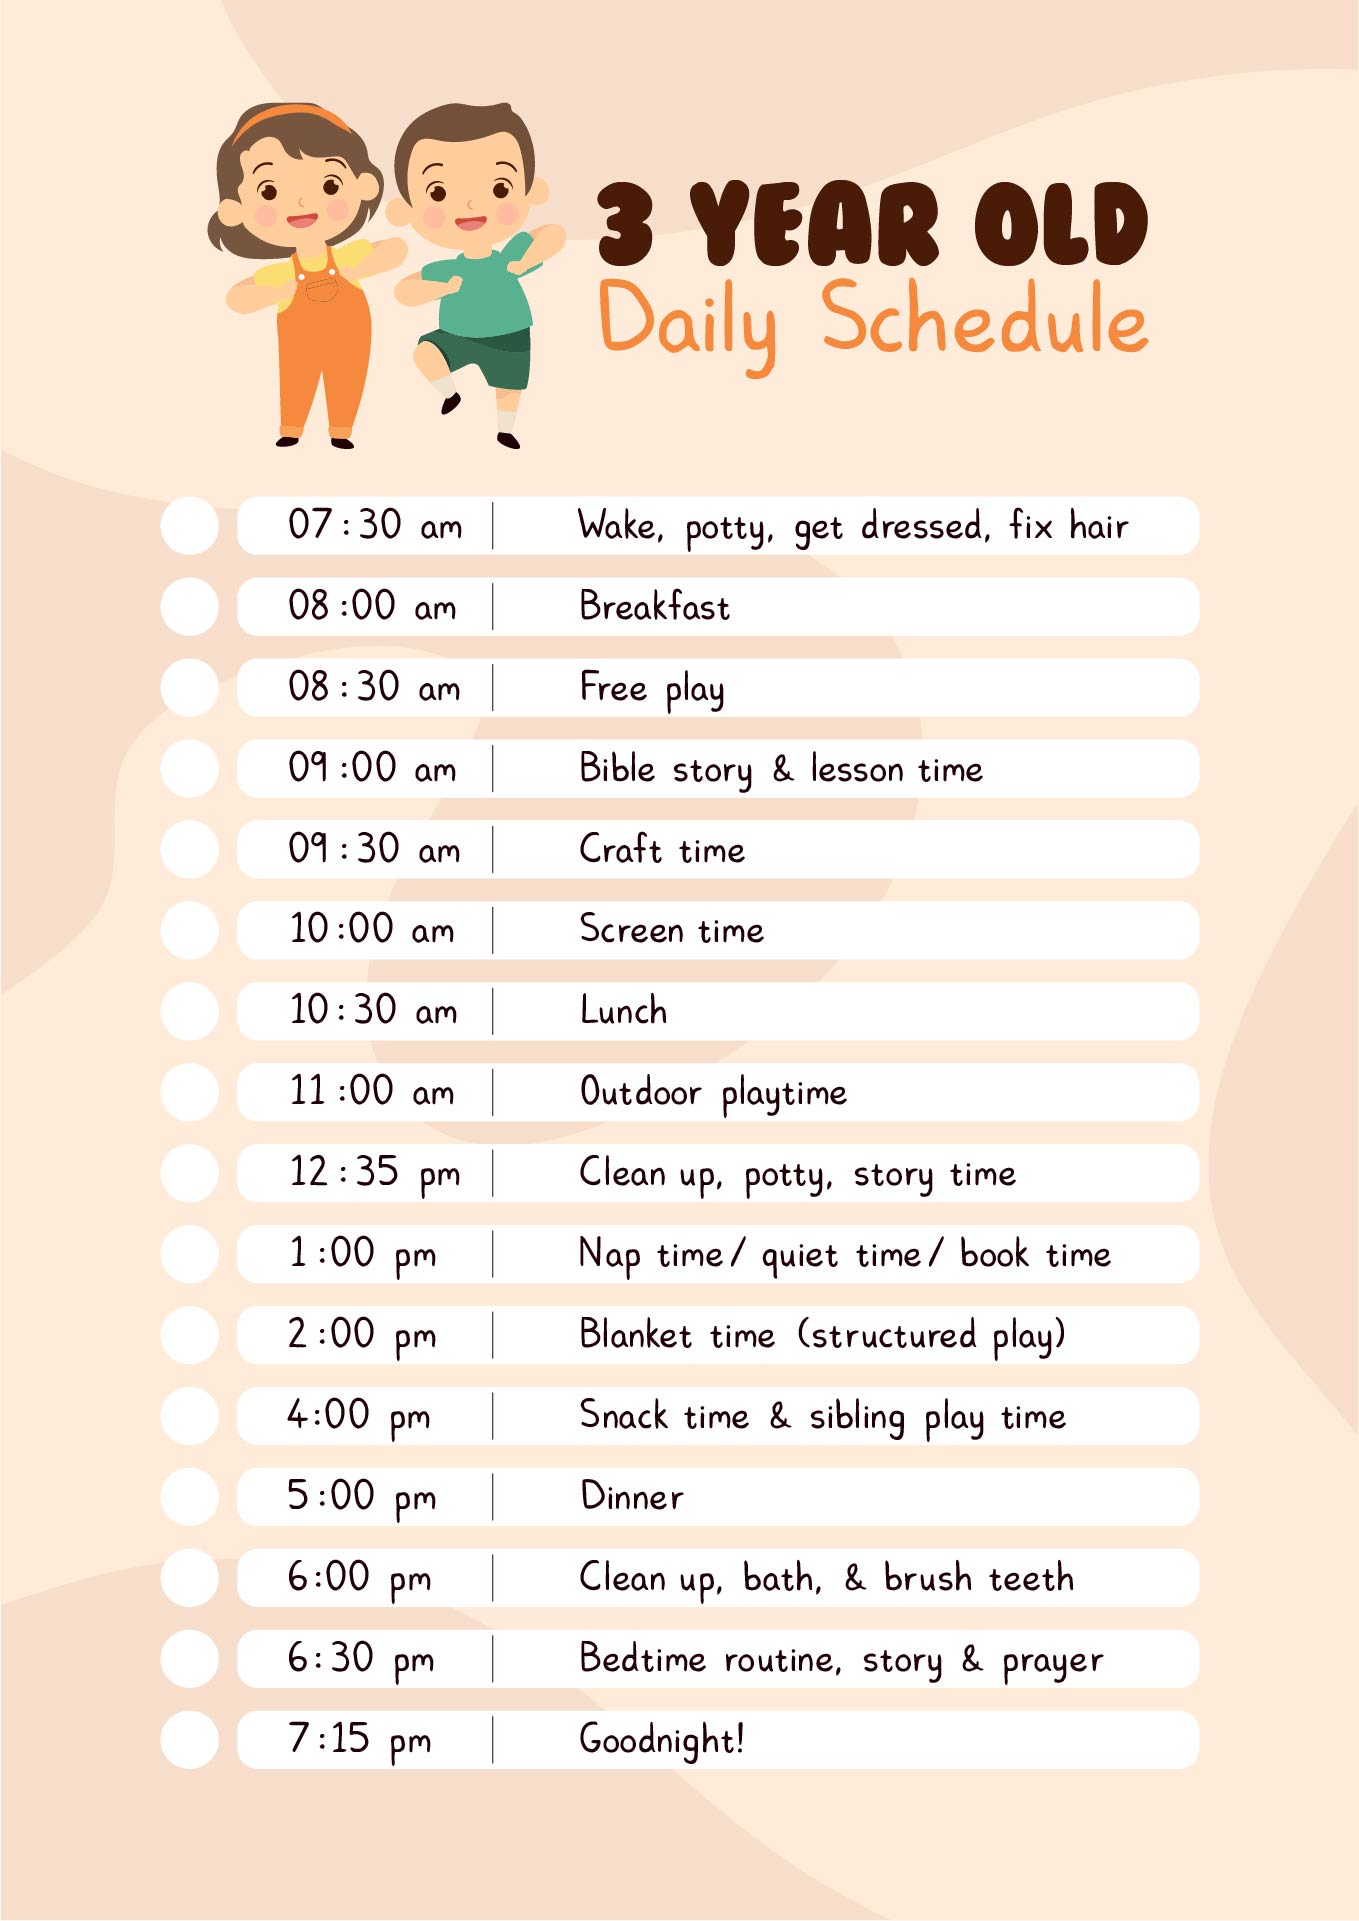 3 Year Old Daily Schedule at Home